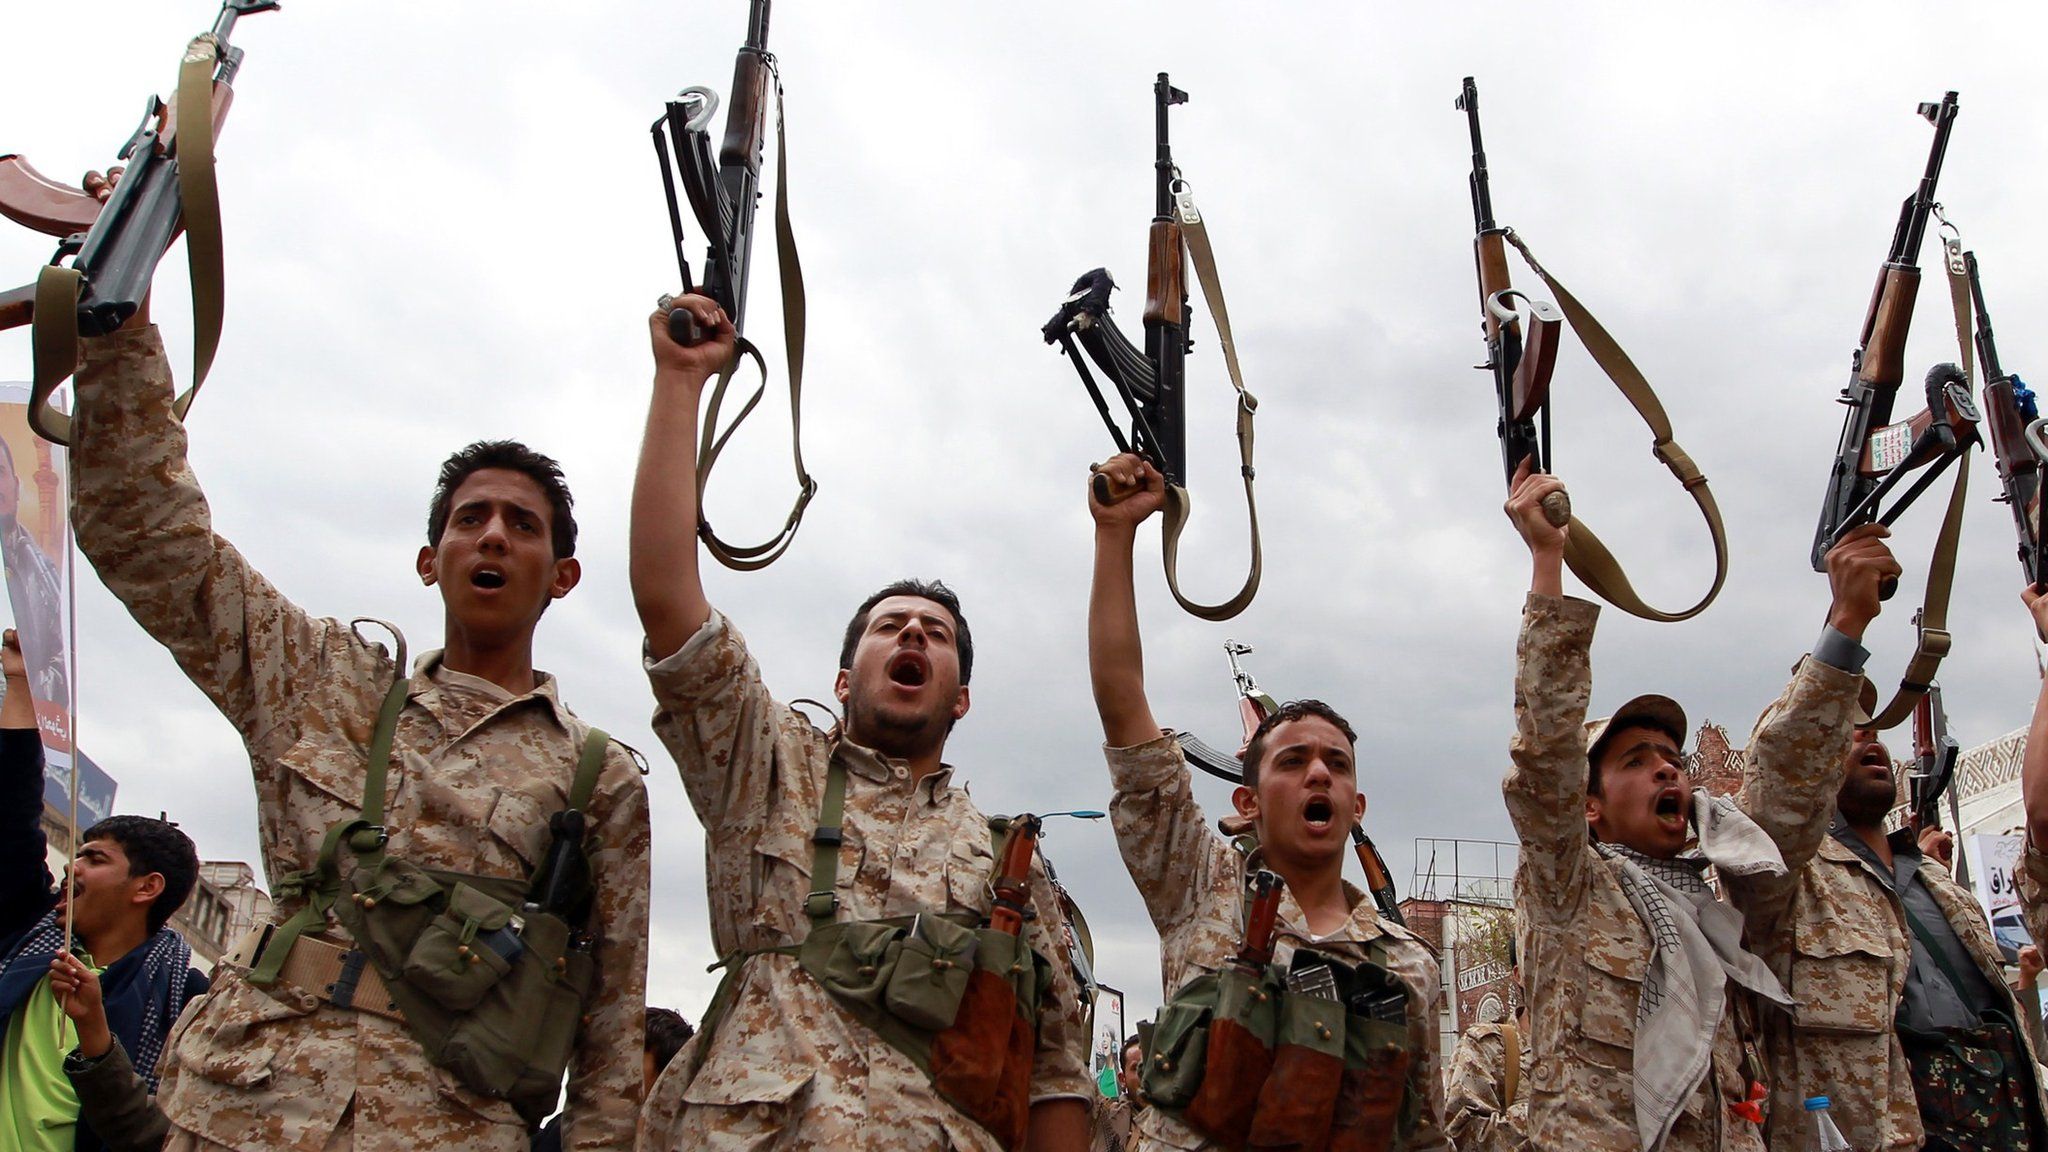 Yemeni men wearing military fatigue and loyal to the Houthi movement brandish their weapons